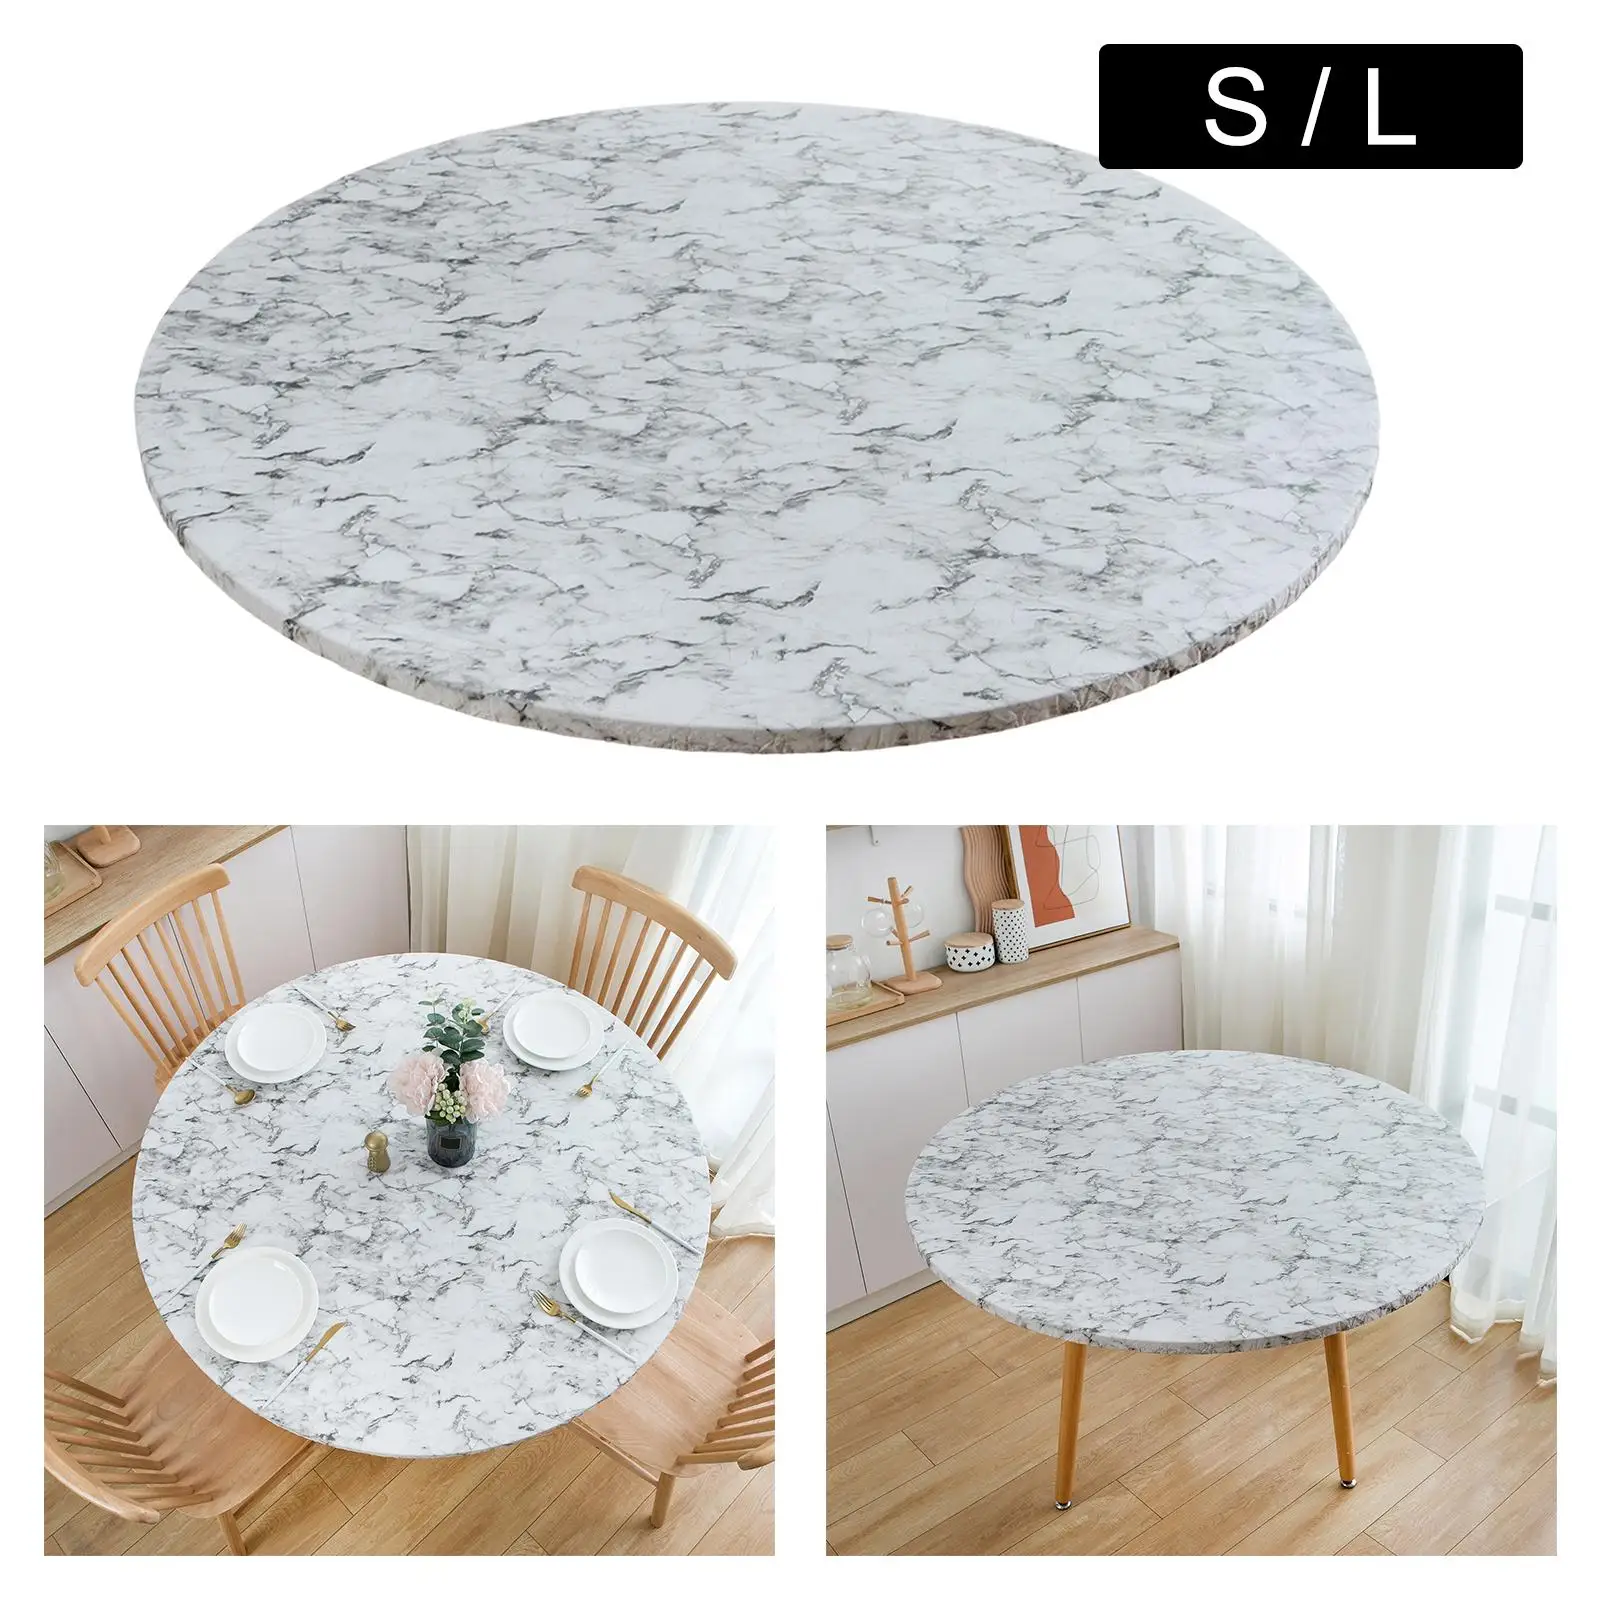 Round Vinyl Fitted Tablecloth PVC Table Cover Table Cloth Wipeable with Flannel Backing Oil Proof for Patio Table Indoor Outdoor